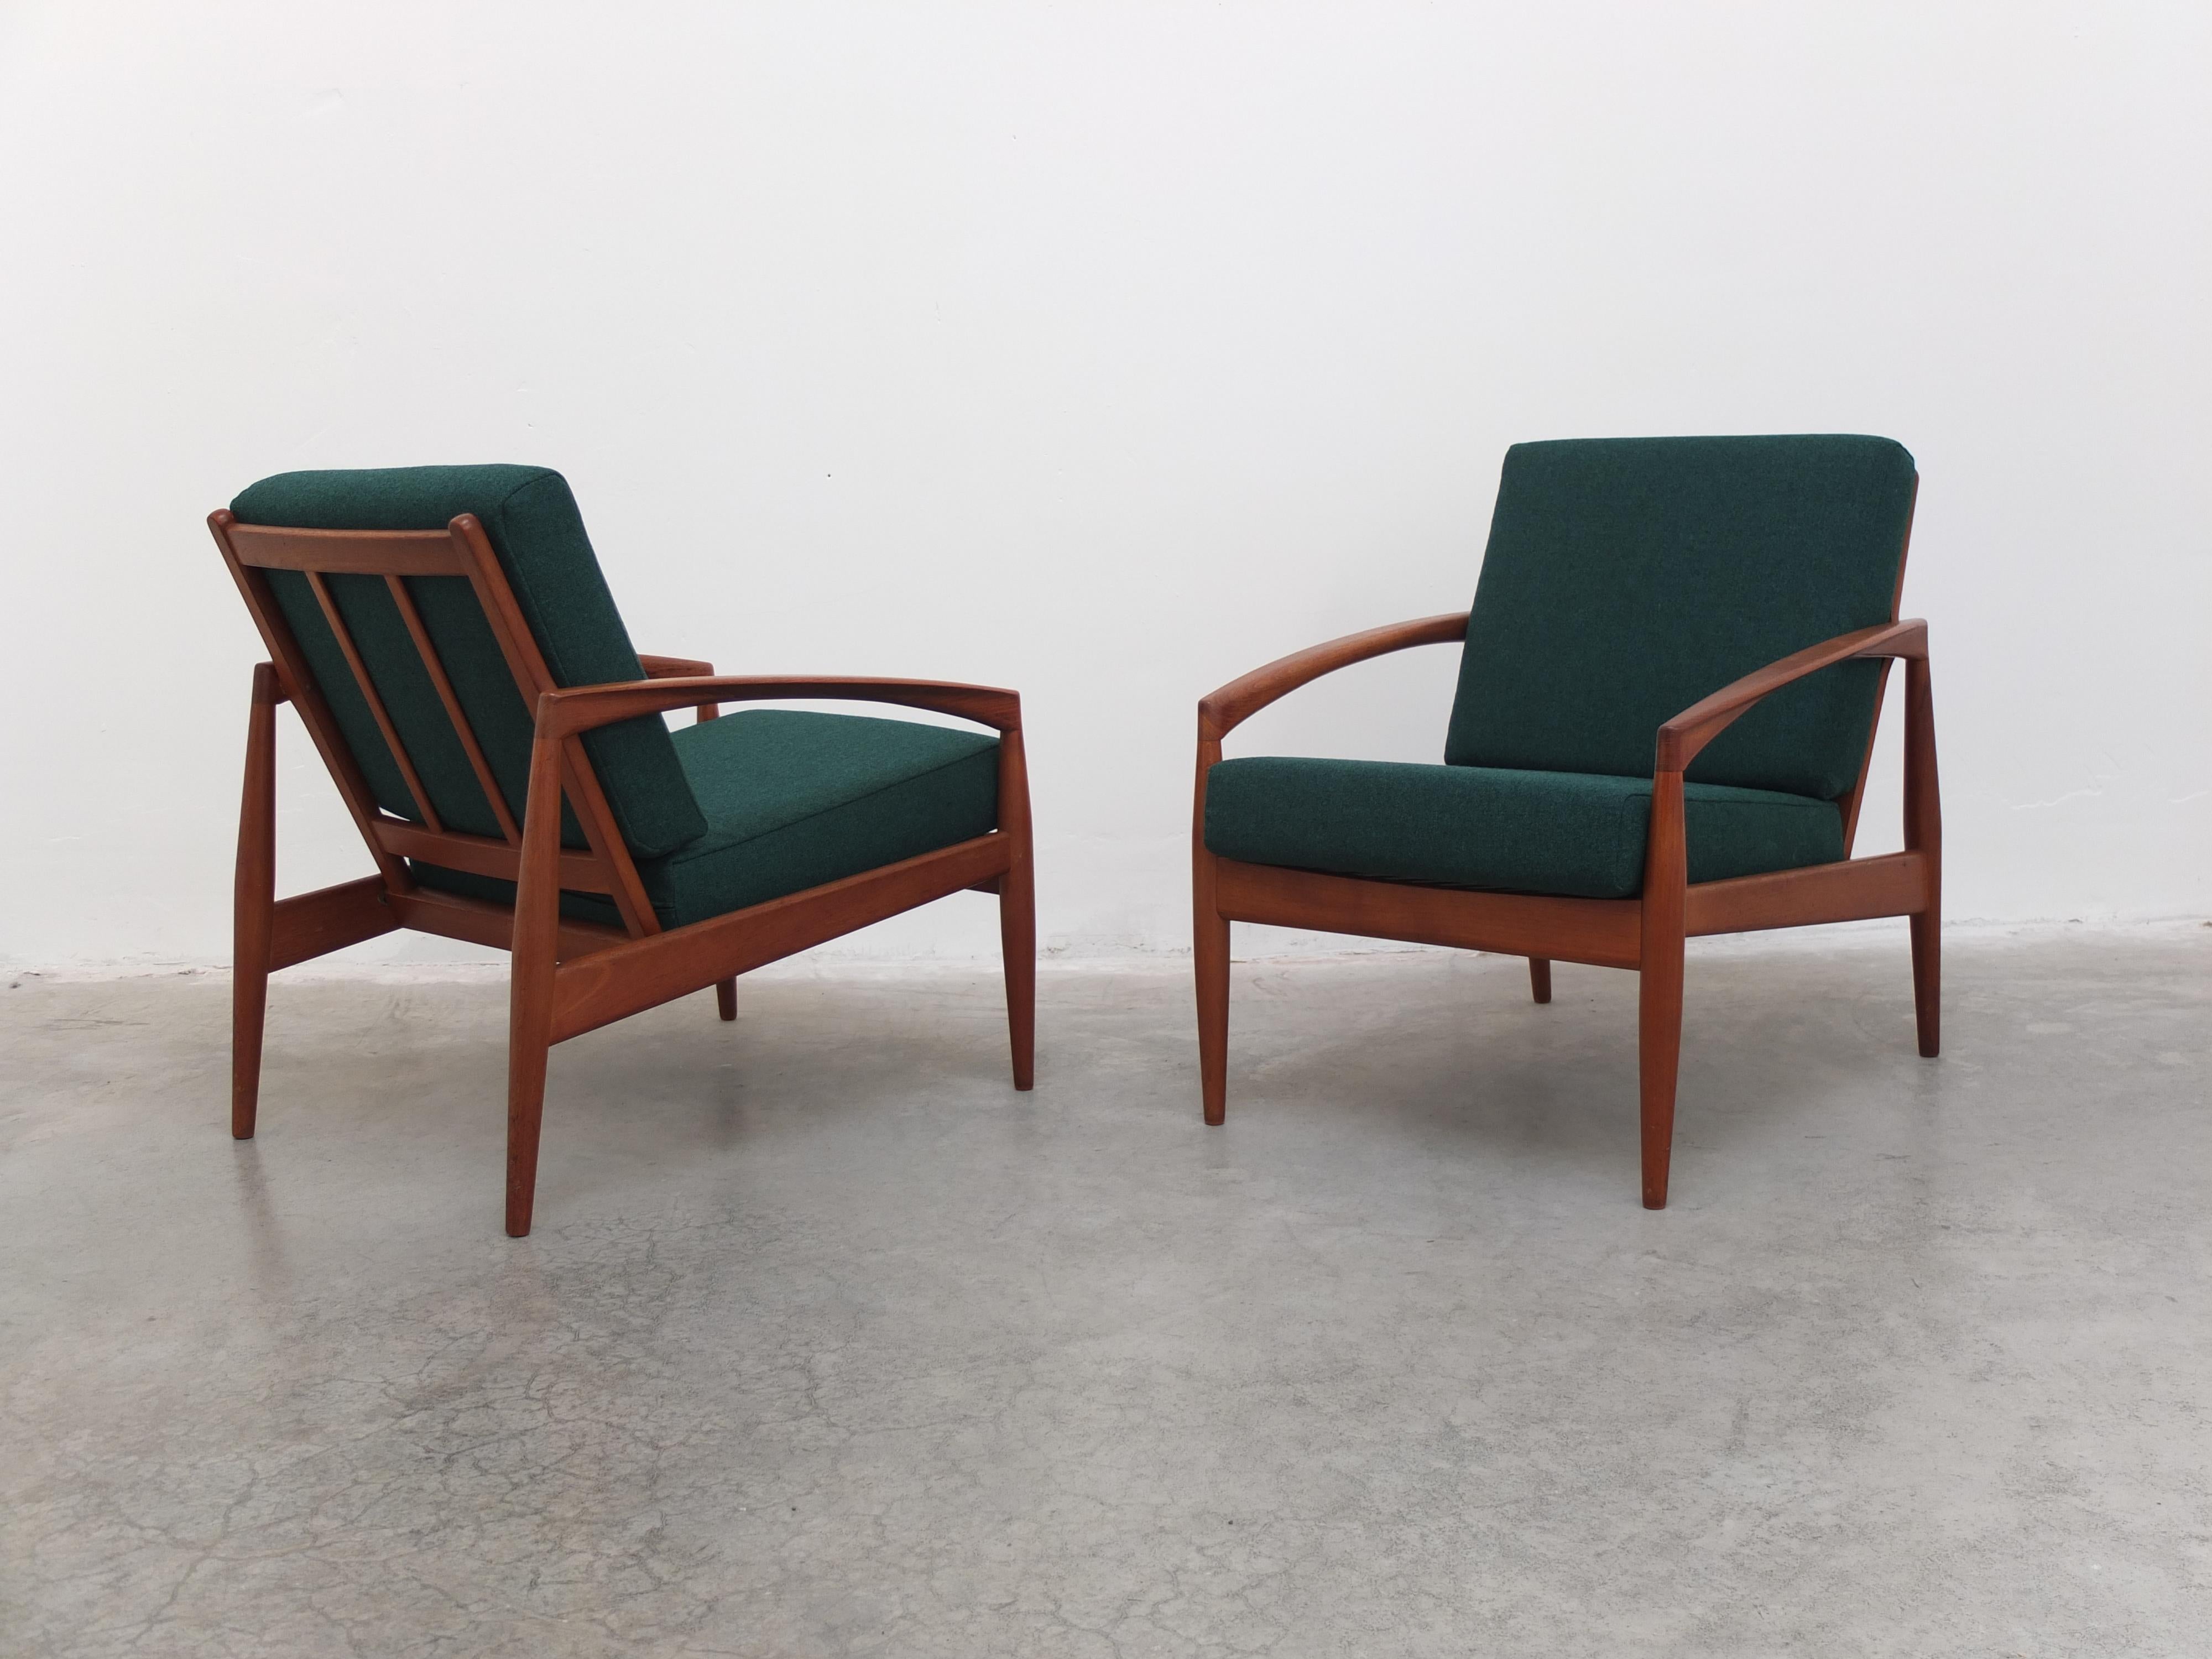 Pair of 'Paper Knife' Easy Chairs by Kai Kristiansen for Magnus Olesen, 1956 For Sale 5